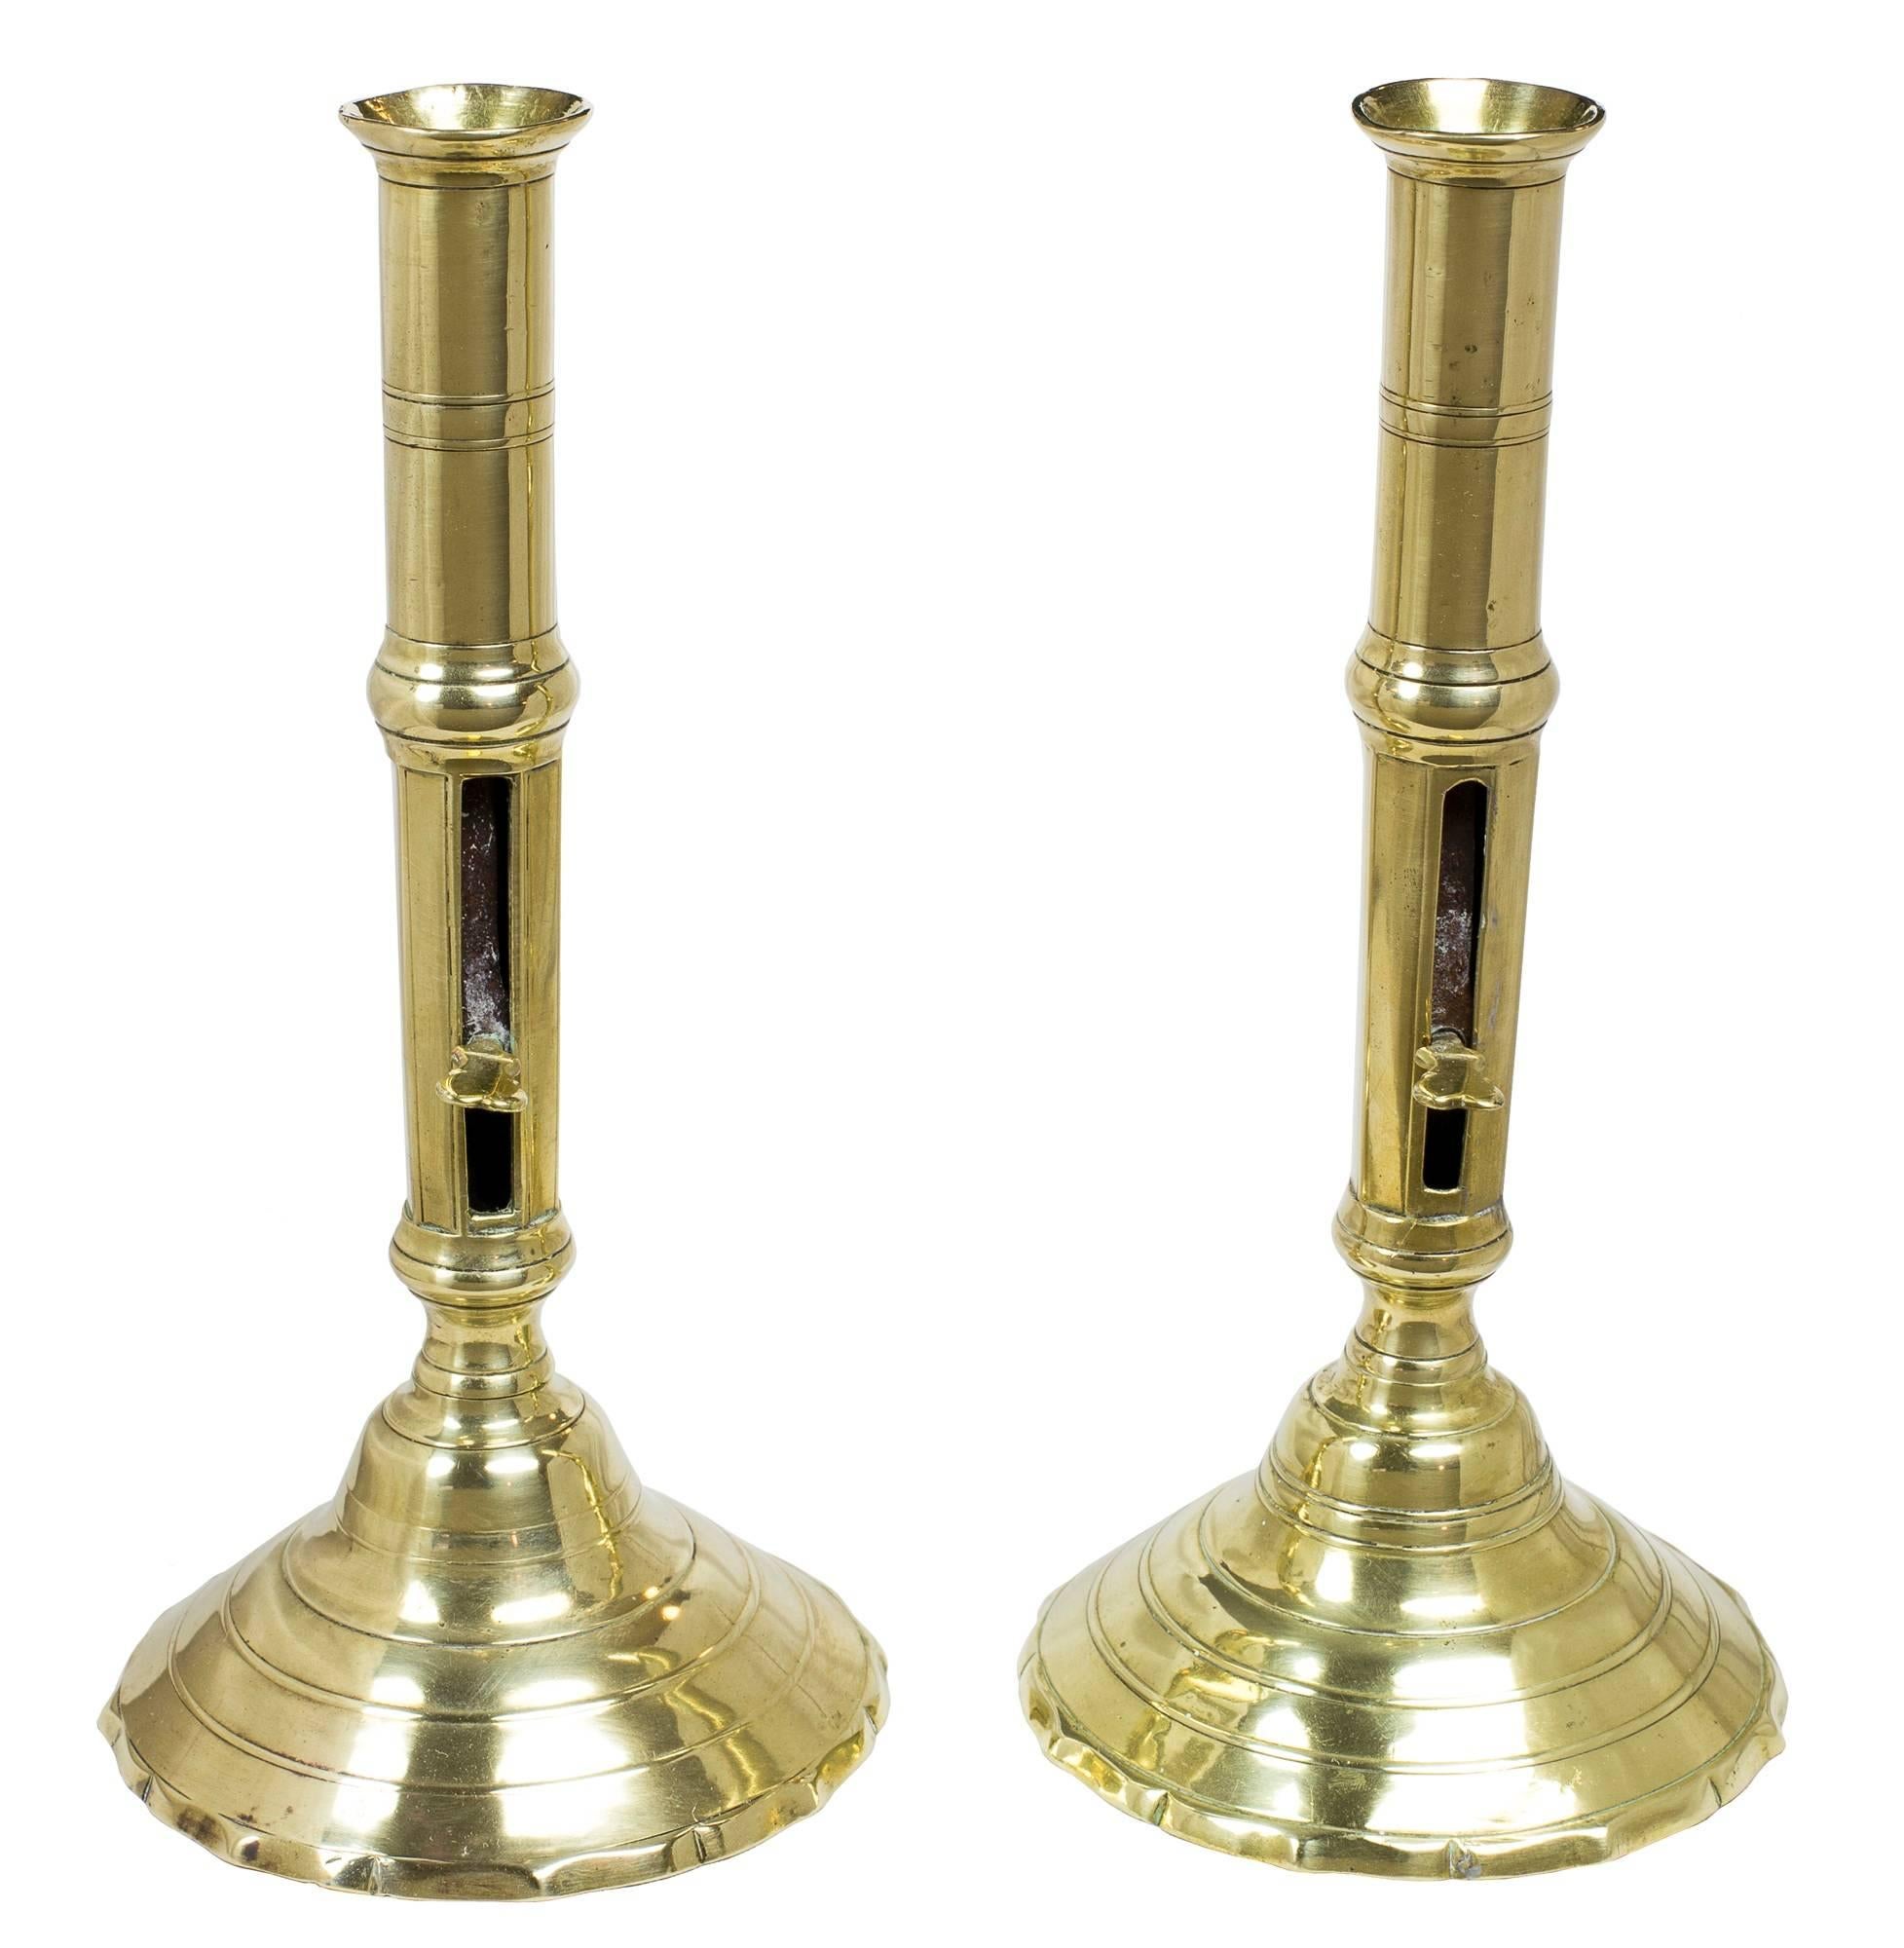 A pair of French push-up brass candlesticks, with circular stepped base, circa 1750-1780.